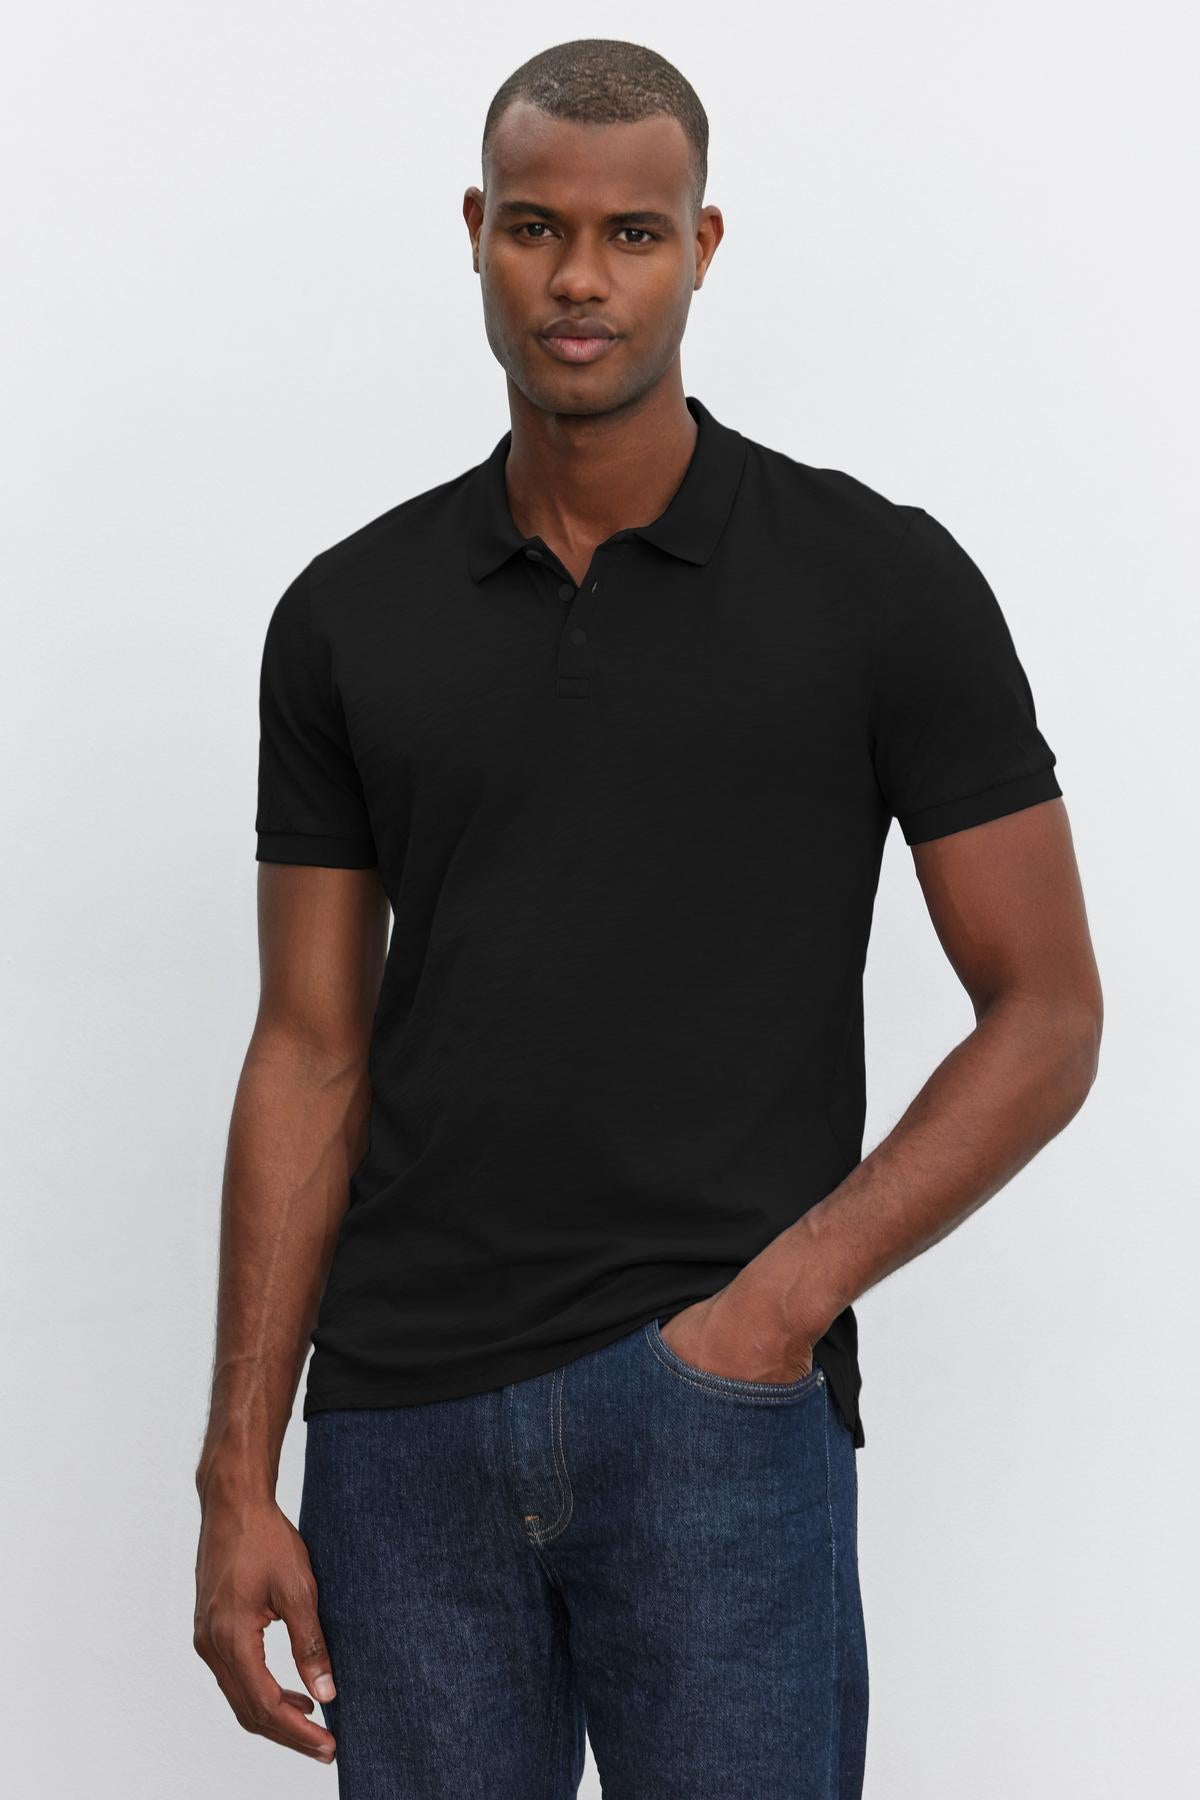   A man wearing a black heathered texture NIKO POLO shirt and blue jeans standing against a white background, looking at the camera with a neutral expression. (Brand Name: Velvet by Graham & Spencer) 